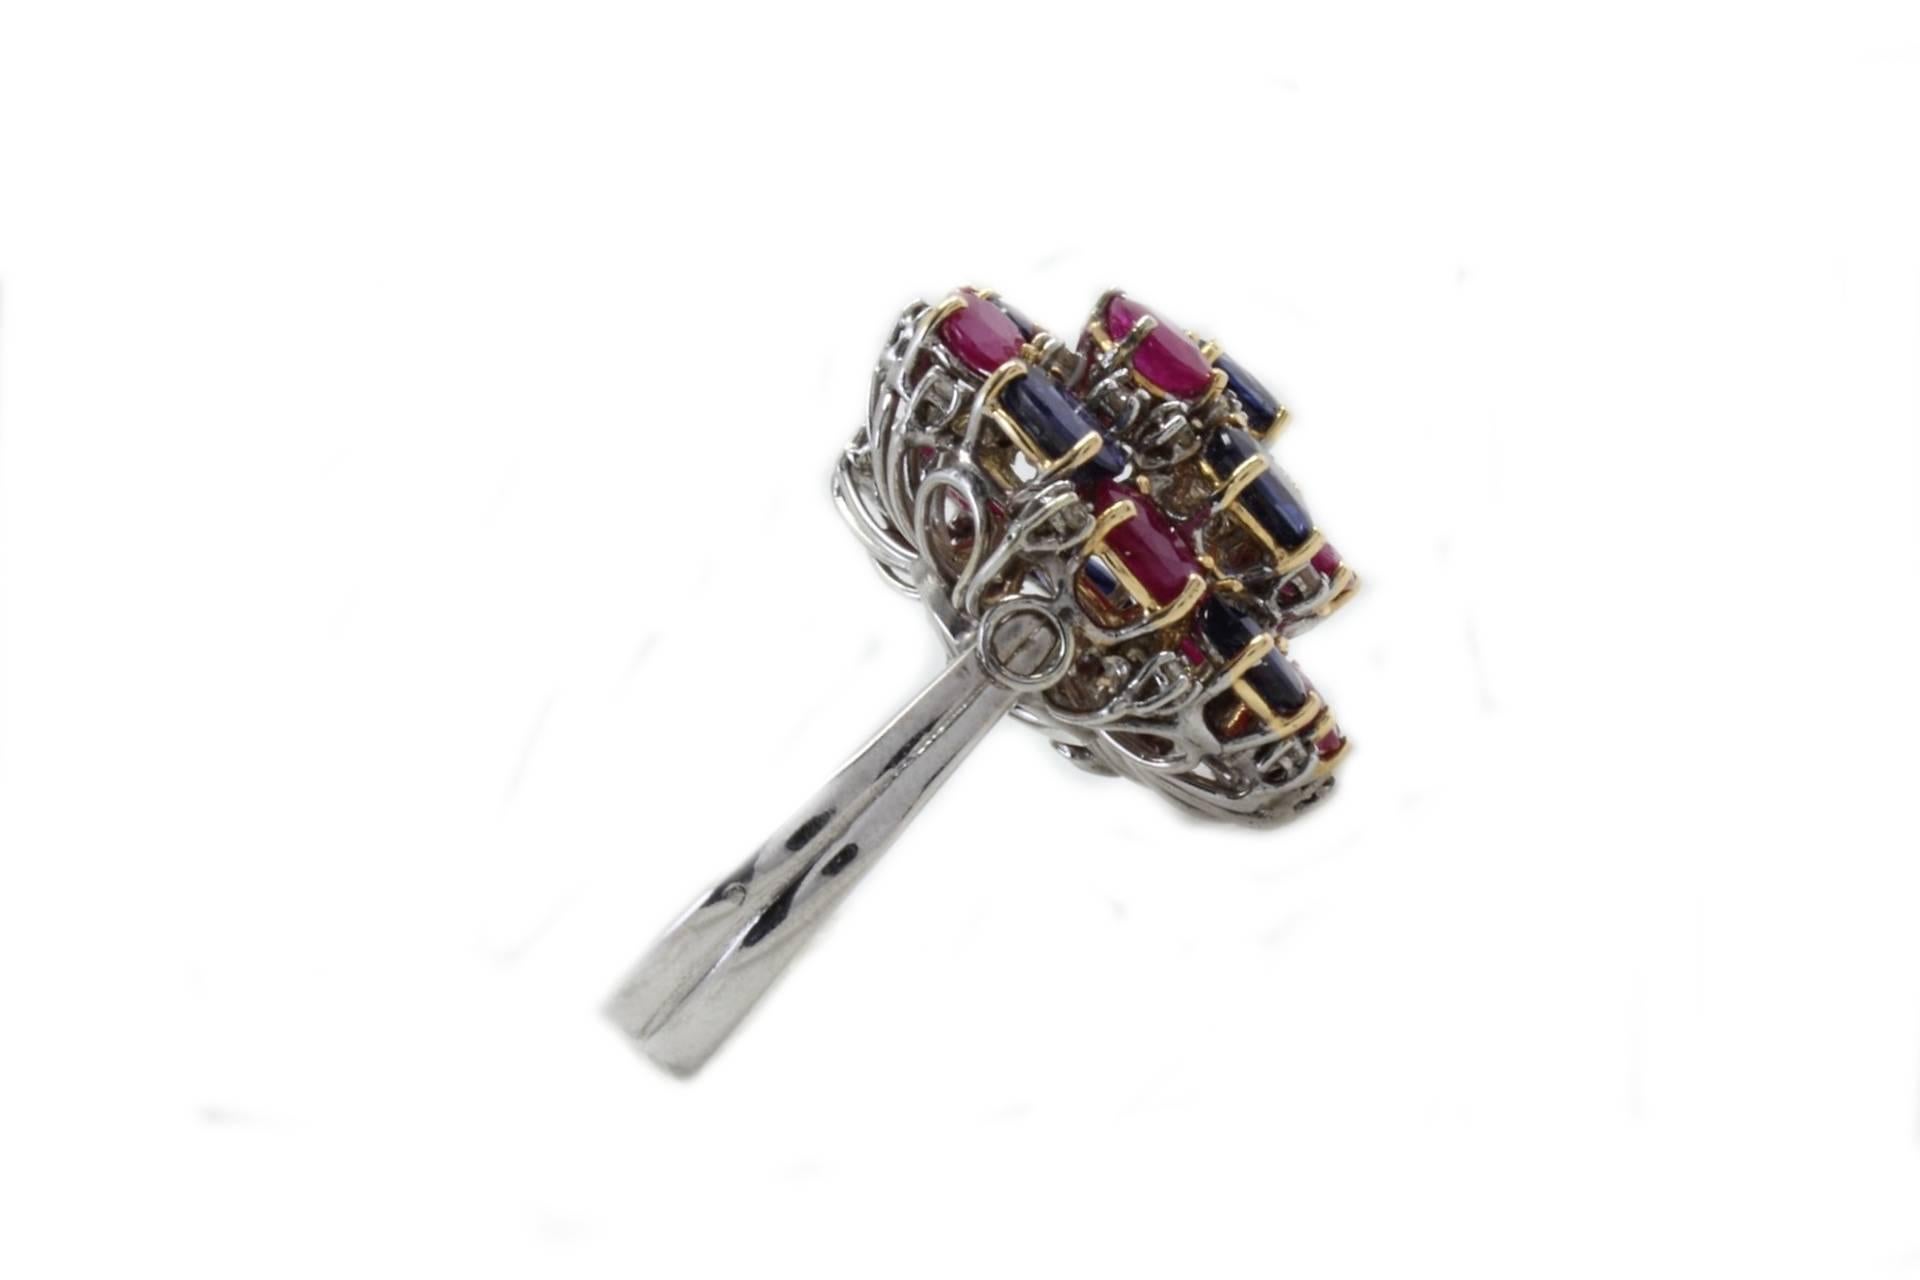 A twist of blue sapphires and rubies composes this ring together with shiny diamonds. All in 18Kt white gold and details in 18Kt yellow gold.

blue sapphires and rubies(9.92Kt)
diamonds(0.40Kt)
Tot. weight 14 gr.
R.f.624553
